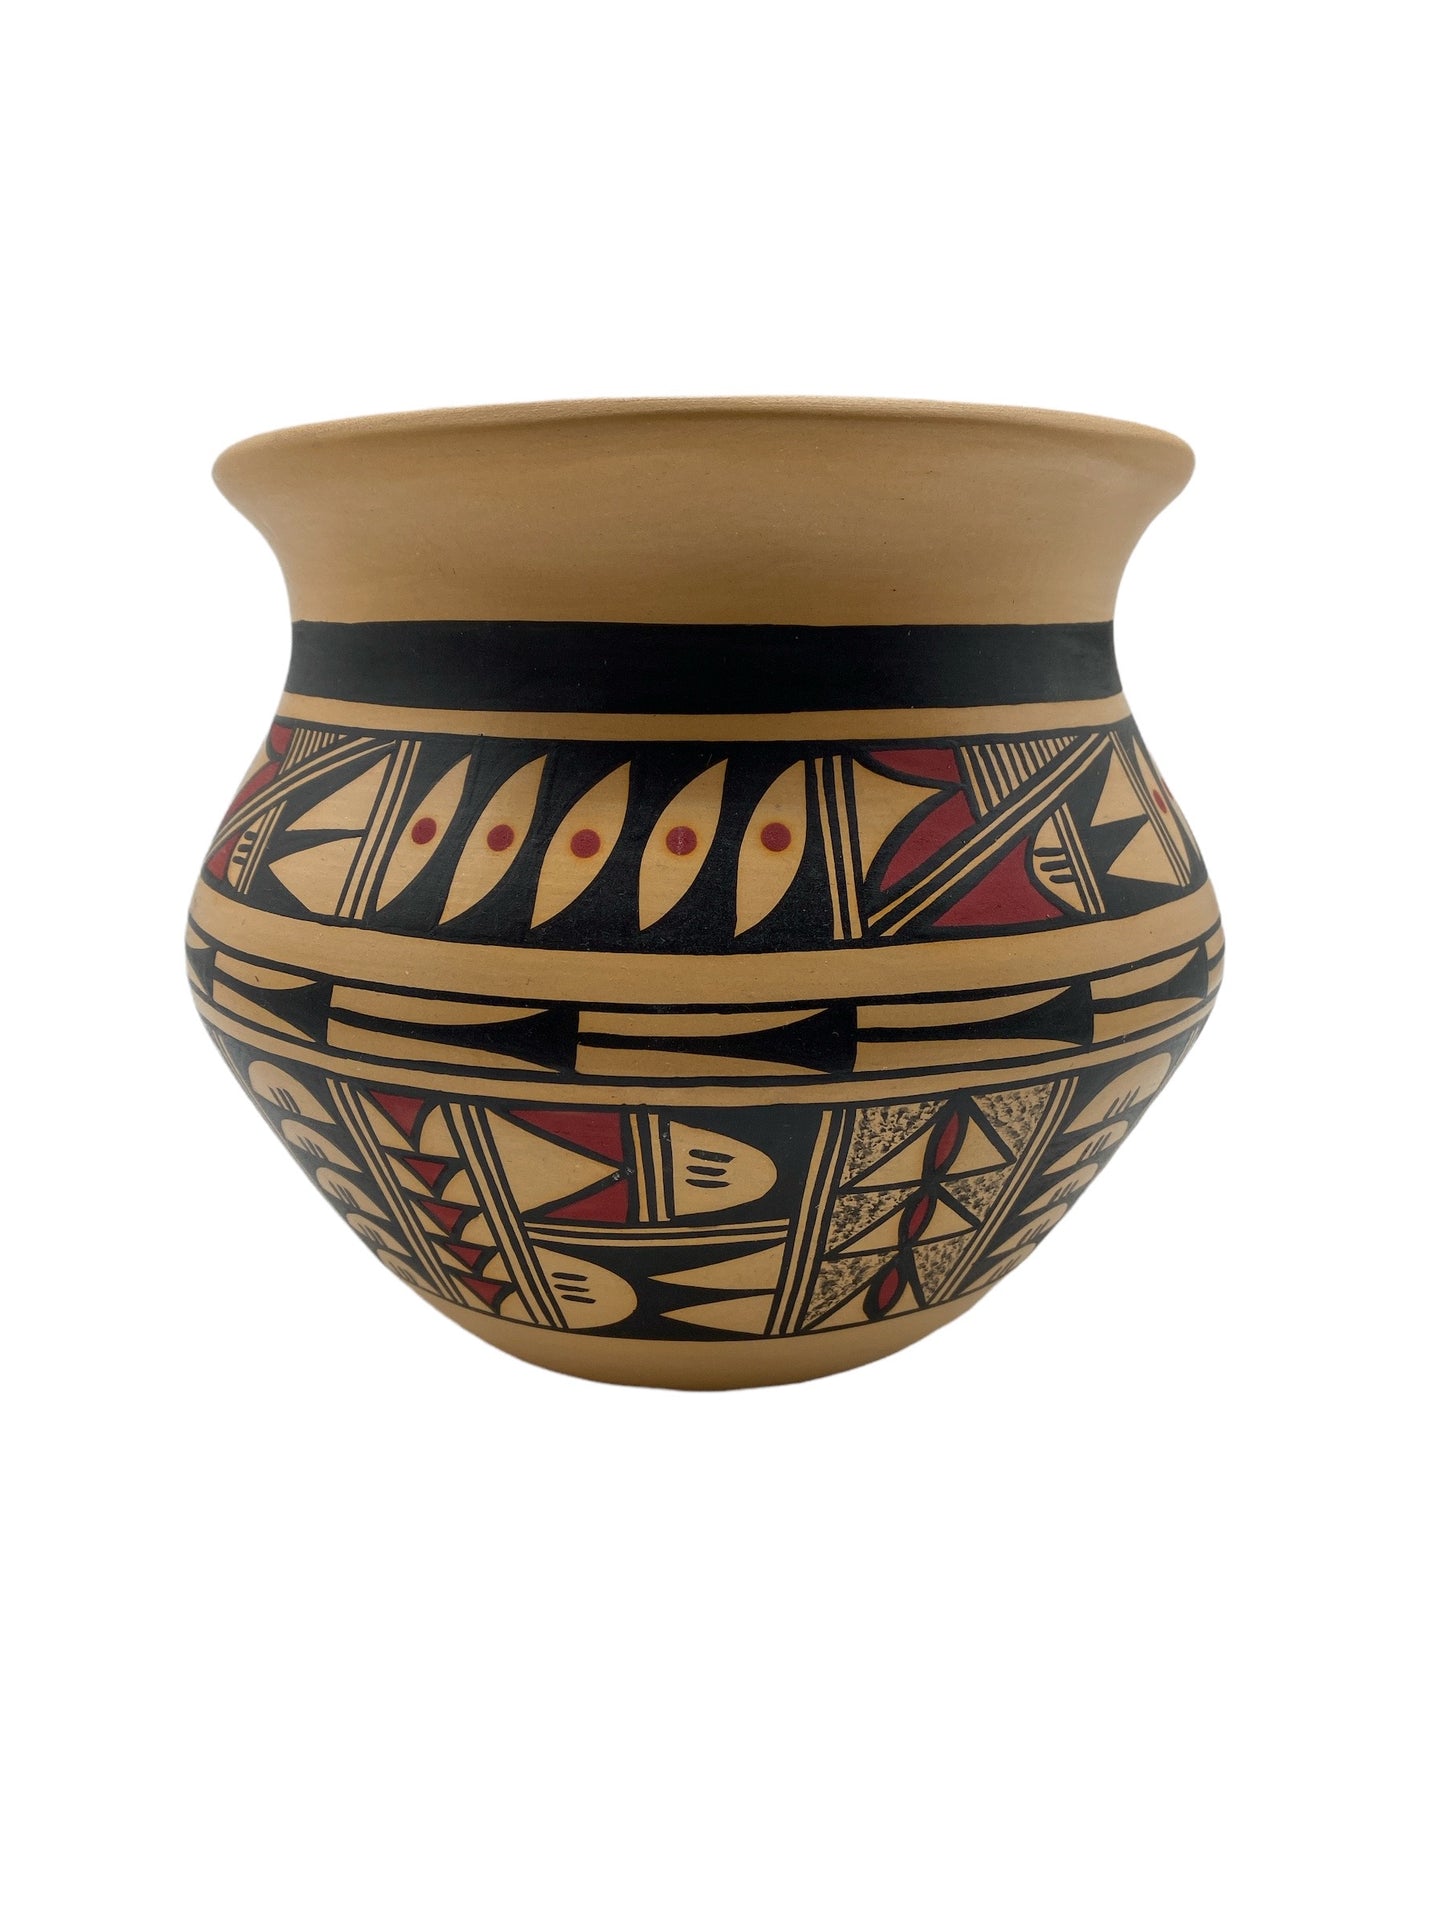 hopi pottery for sale, native american pottery for sale, telluride gallery 